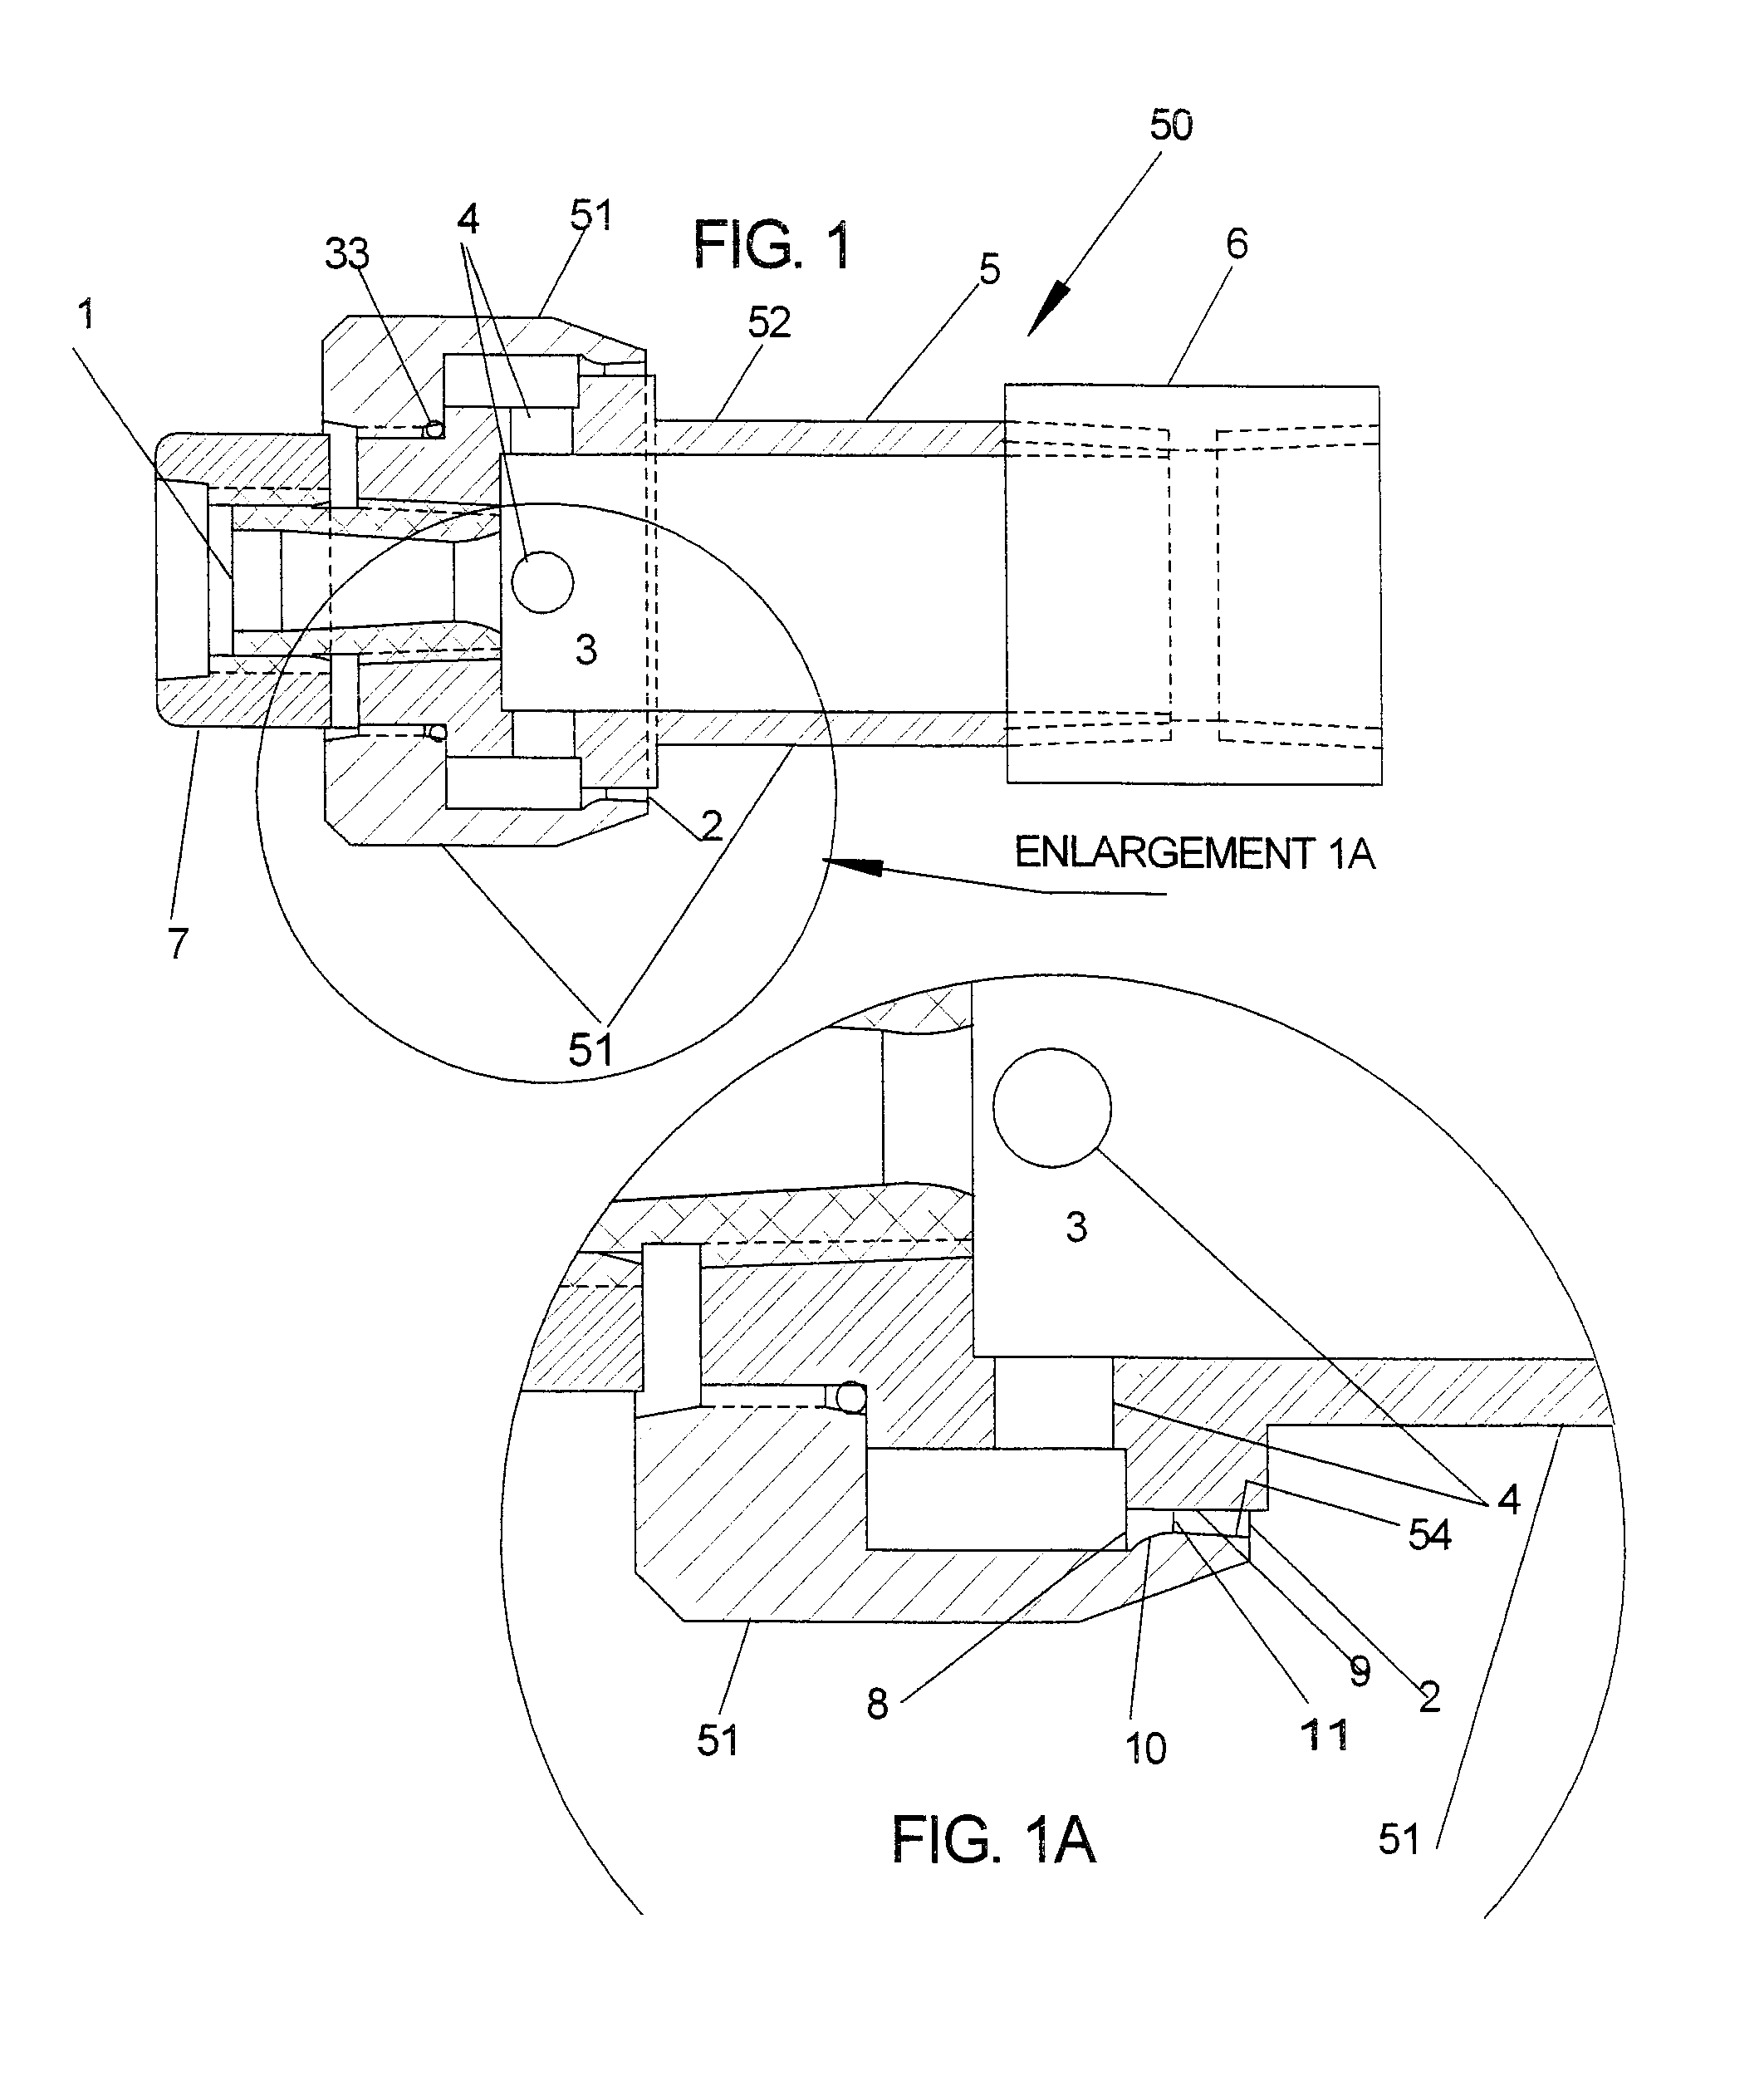 Method and apparatus for pneumatic excavation